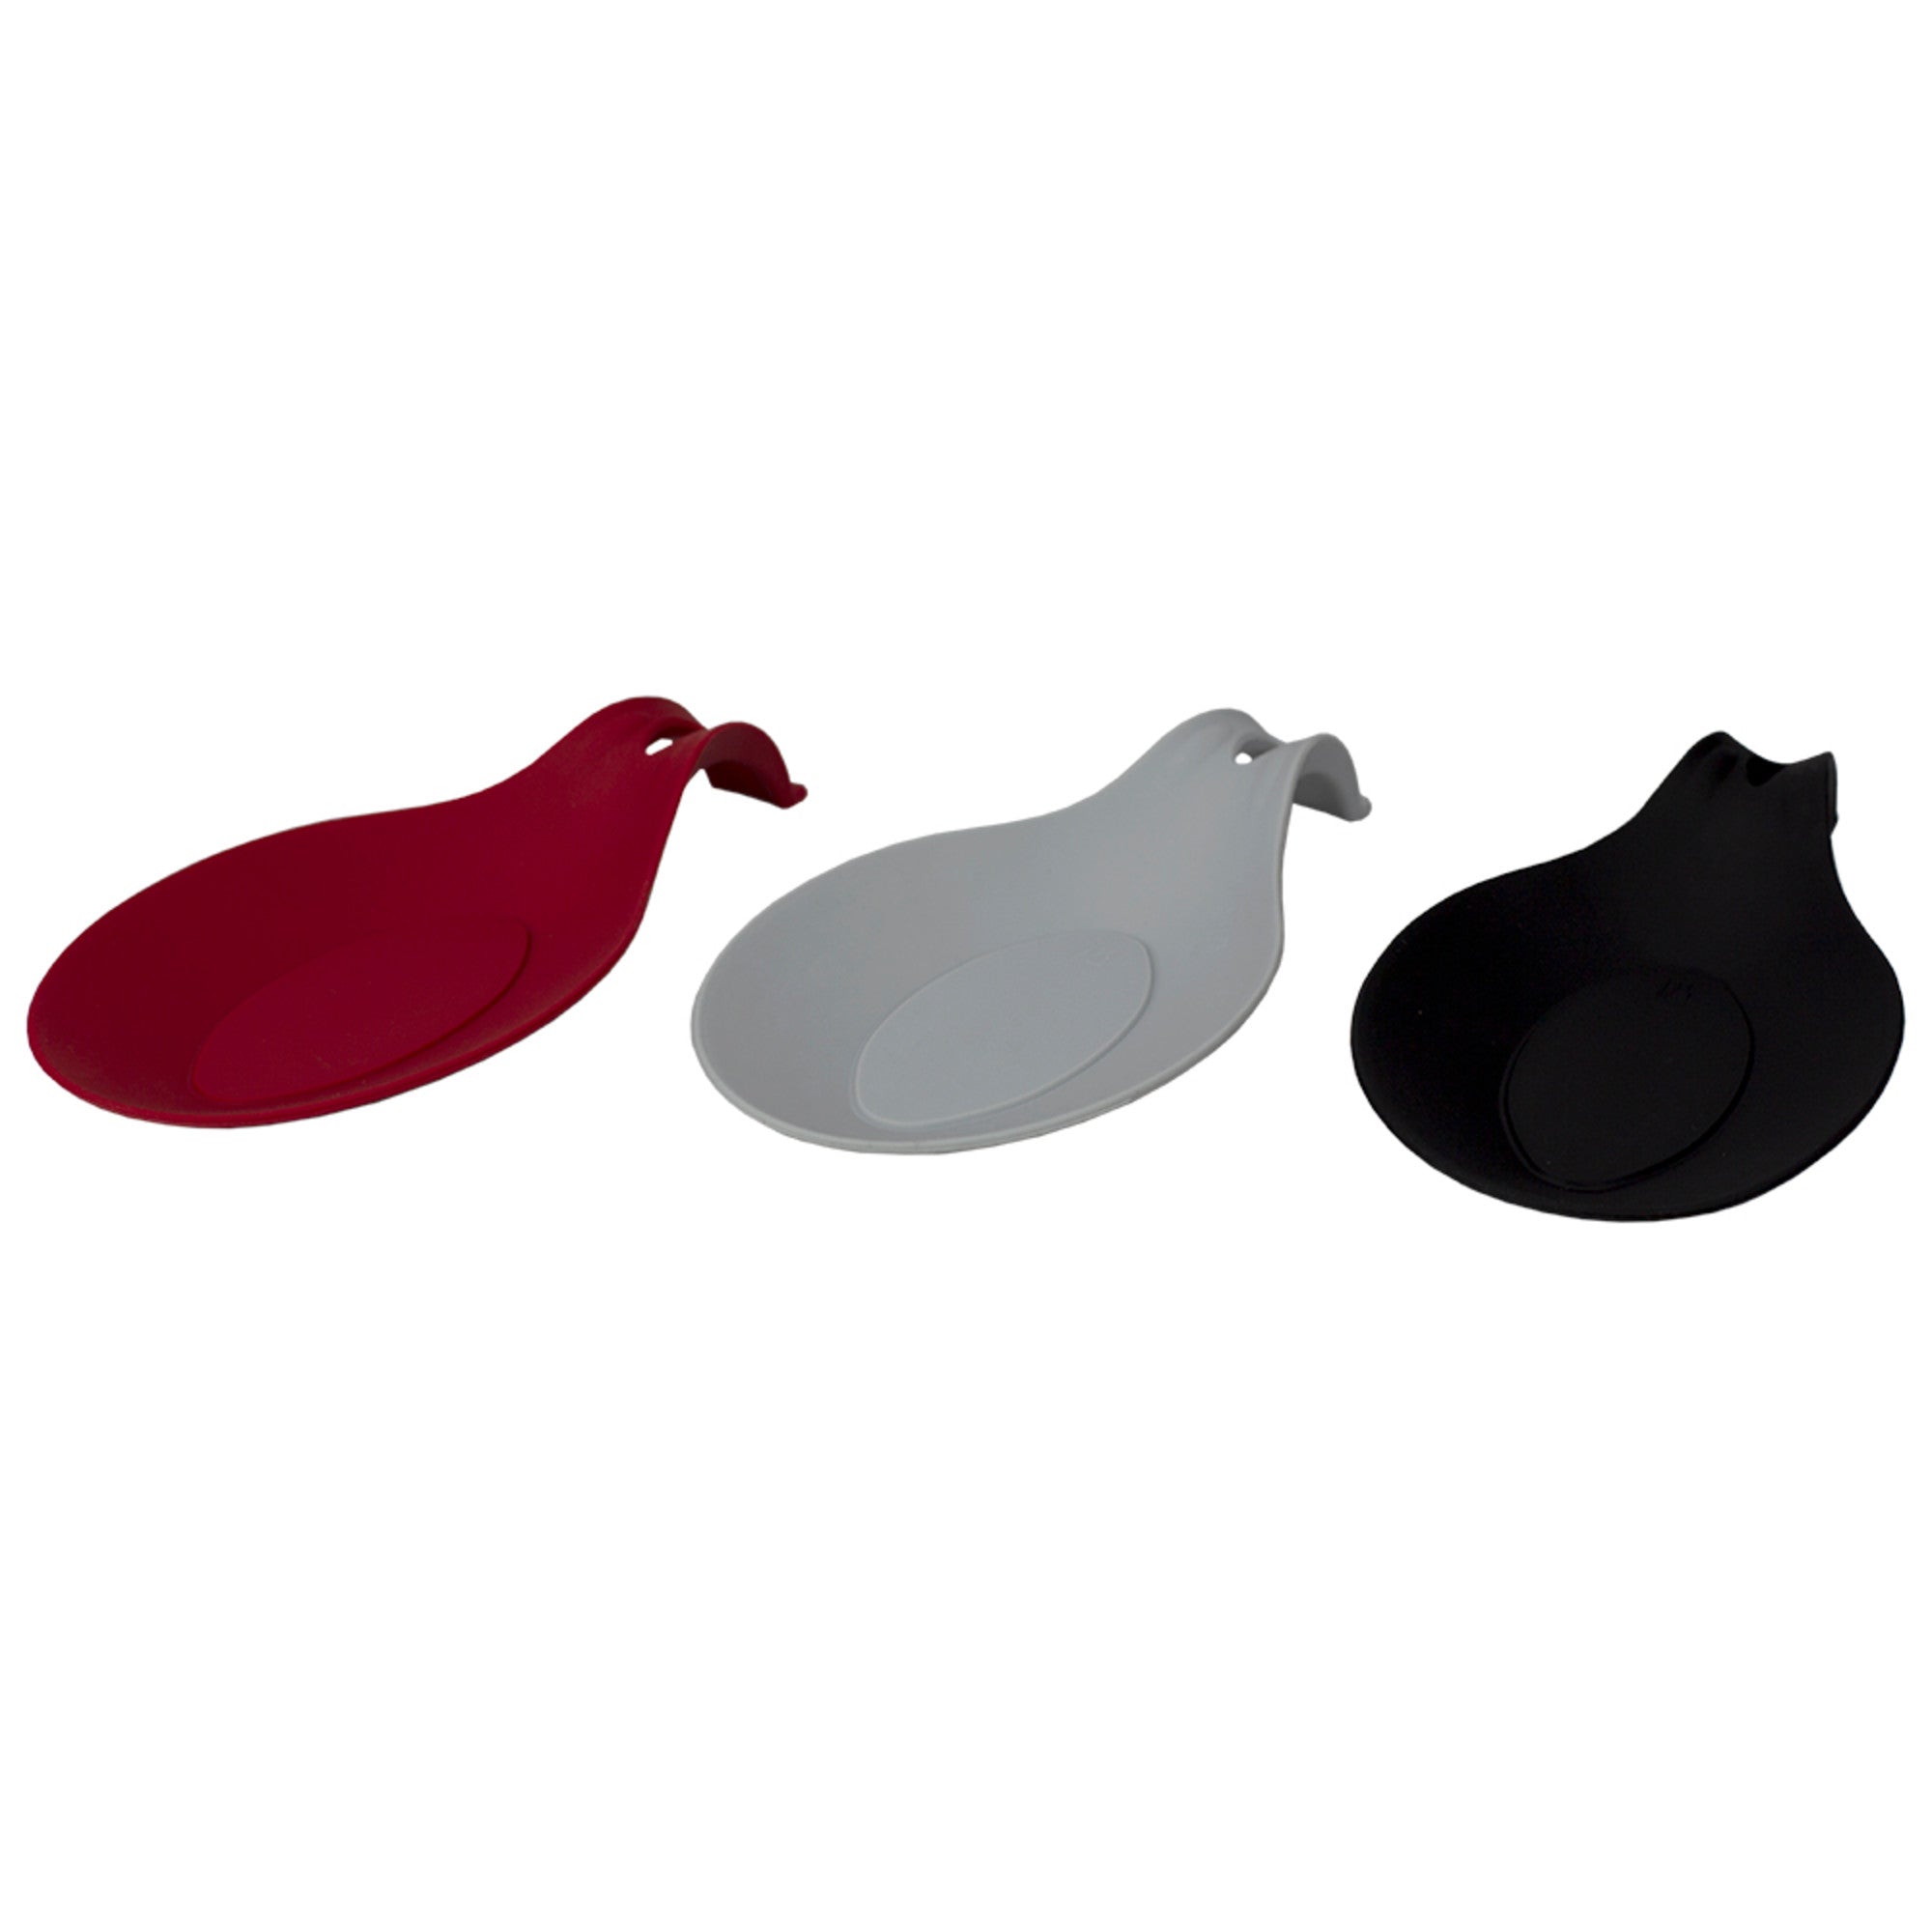 Home Basics Food Grade Flexible Silicone Oversized Almond Shaped Spoon Rest - Assorted Colors